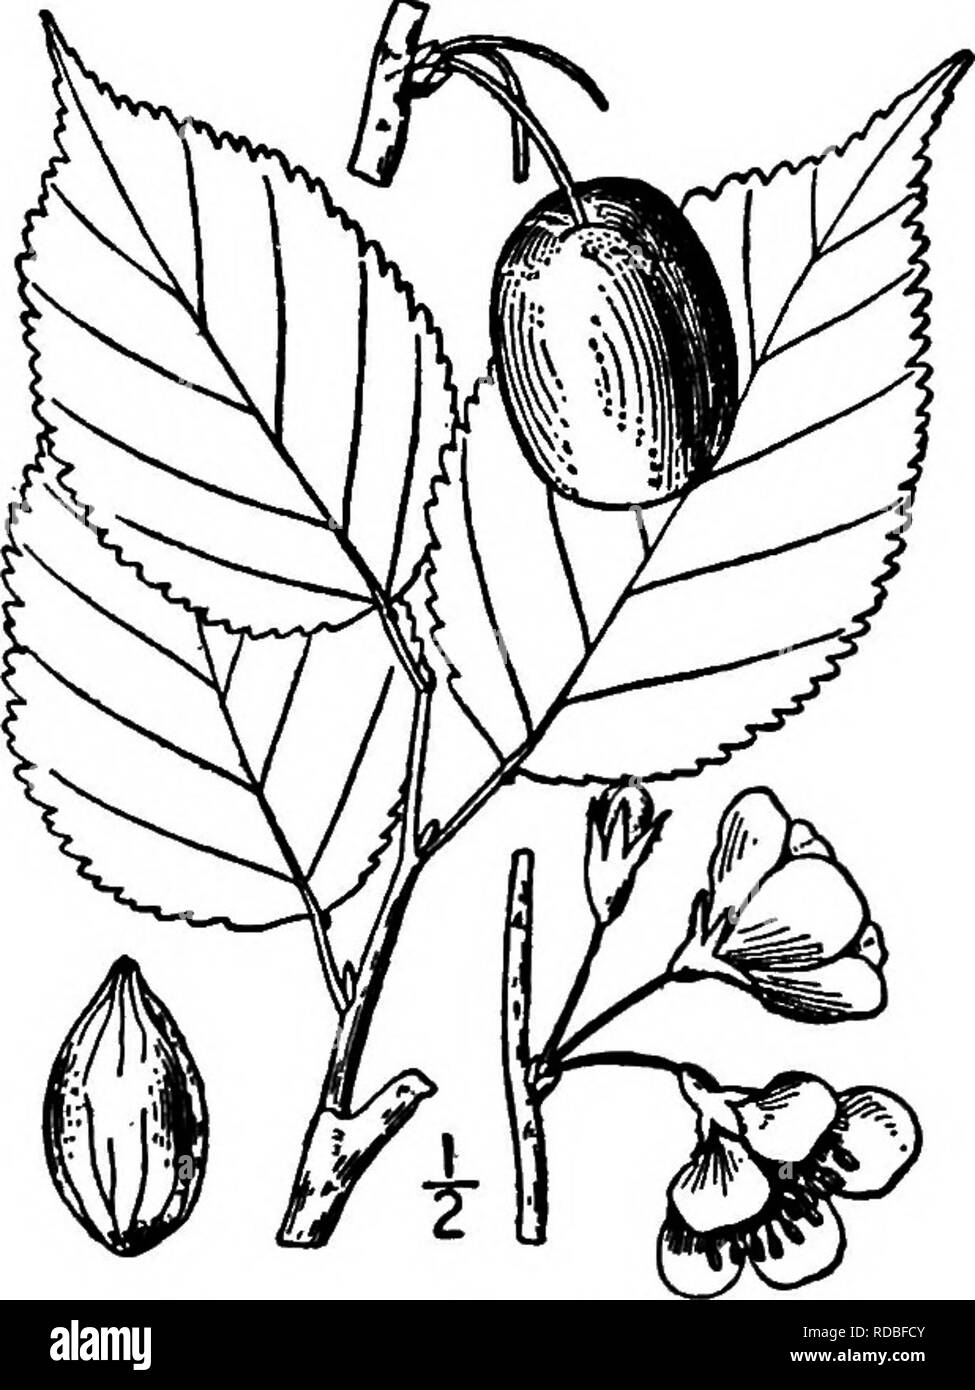 . North American trees : being descriptions and illustrations of the trees growing independently of cultivation in North America, north of Mexico and the West Indies . Trees. Fig. 452. — Wild Goose Plum. 4-flowered umbels on slender, roughish pedicels; the calyx-tube is obconic, the lobes ovate, blunt or pointed, glandular- toothed, hairy on both surfaces; the petals are obovate, seldom notched. The fruit ripens in September or October, is nearly globular, 2 to 2.5 cm. long, bright red; its skin is thick, the flesh thin, hard, and acid; the stone is oval, somewhat swollen, usually rough and pi Stock Photo